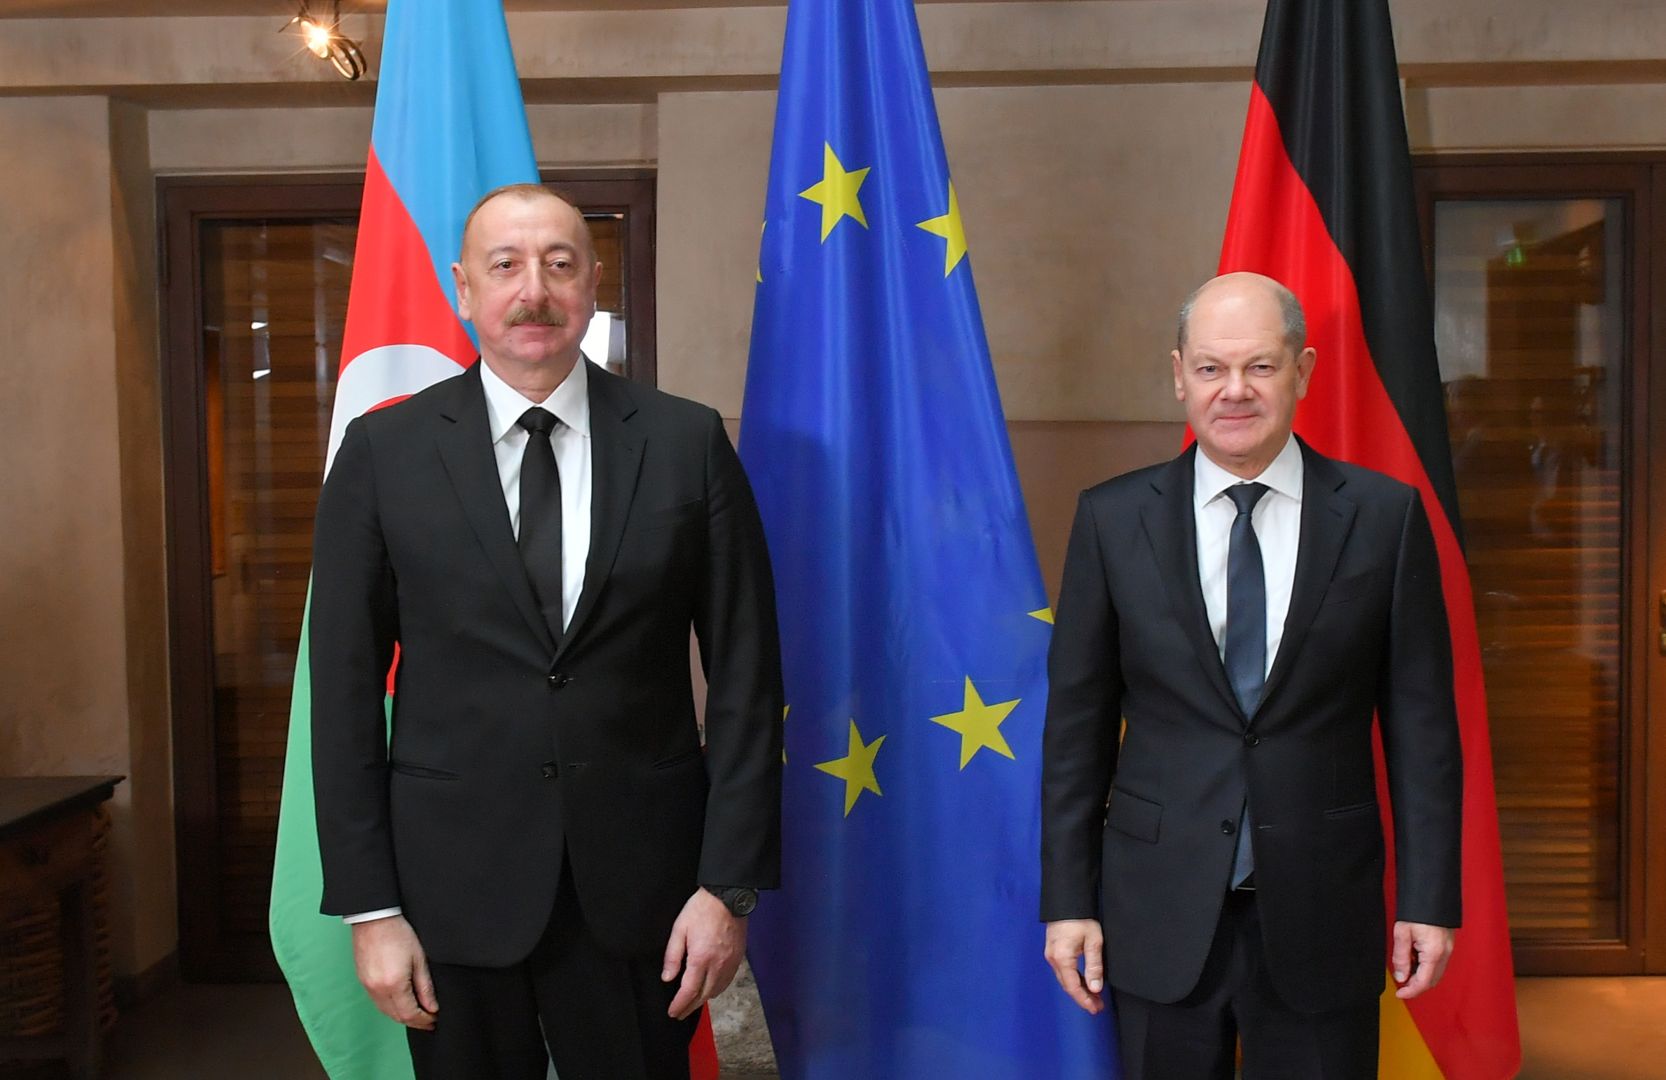 President of Azerbaijan Ilham Aliyev held meetings with Chancellor of Germany Olaf Scholz and Prime Minister of Armenia Nikol Pashinyan in Munich [PHOTOS\VIDEO]